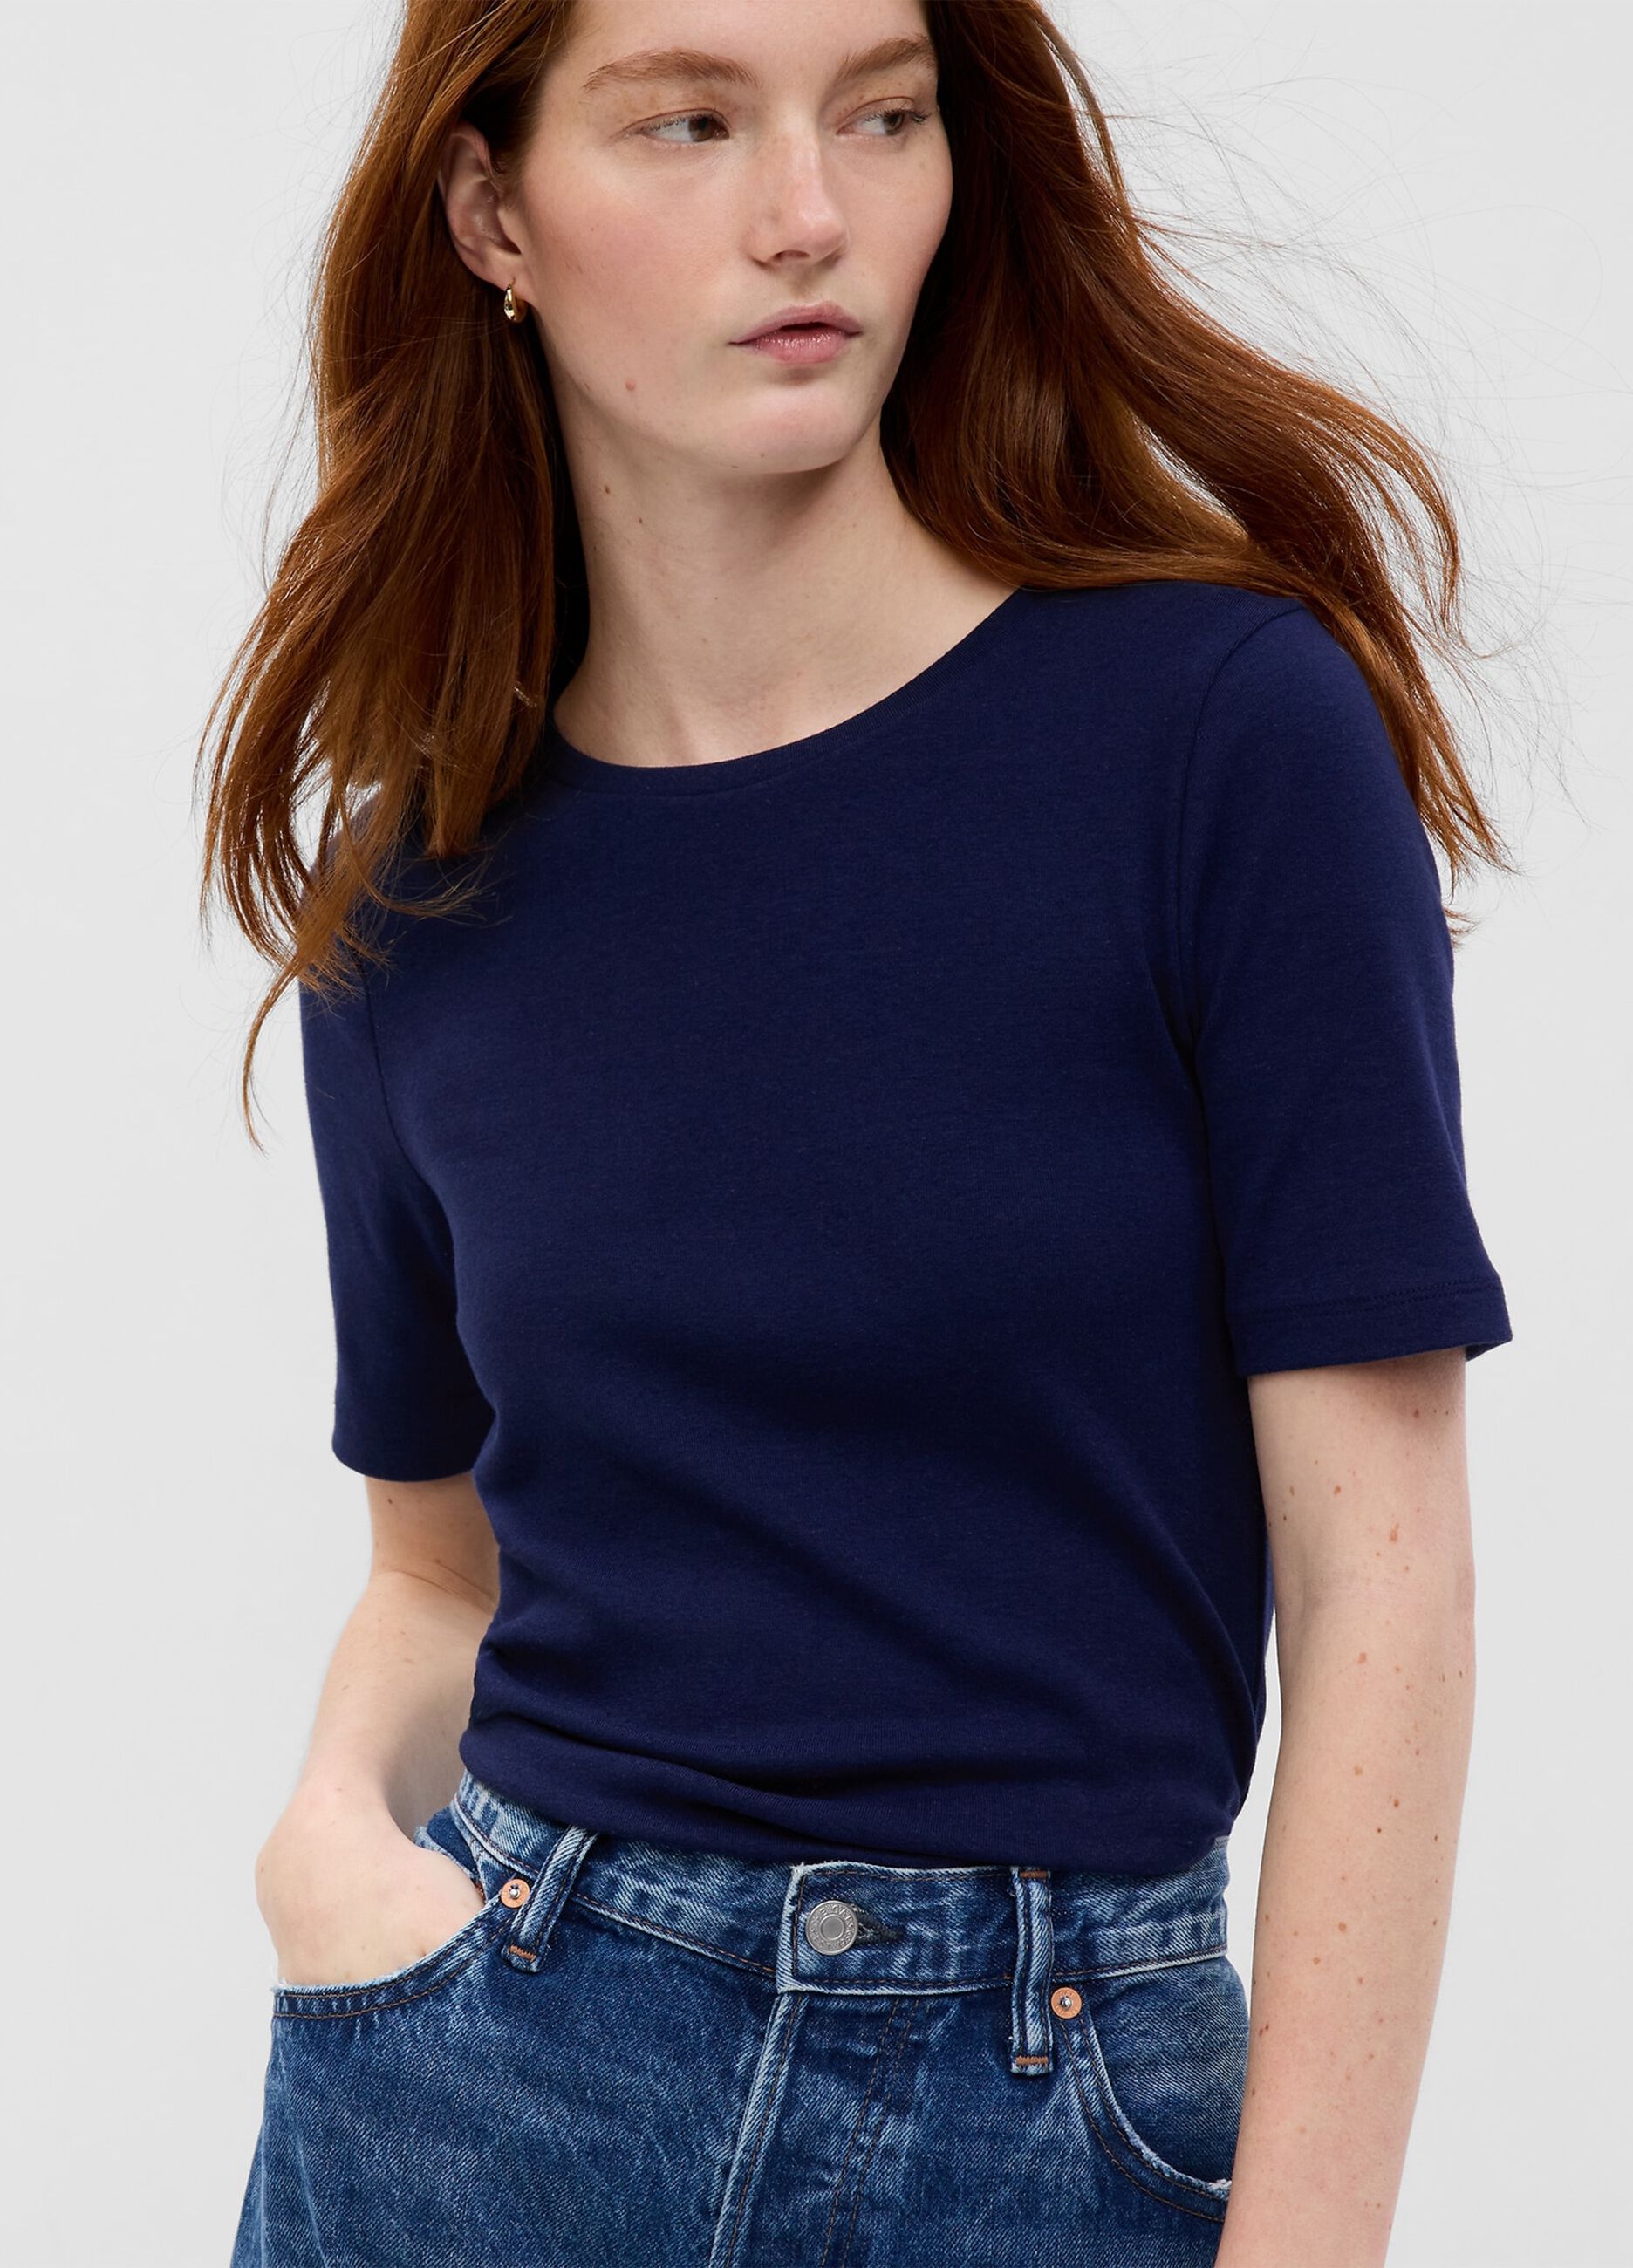 T-shirt in stretch cotton and viscose blend